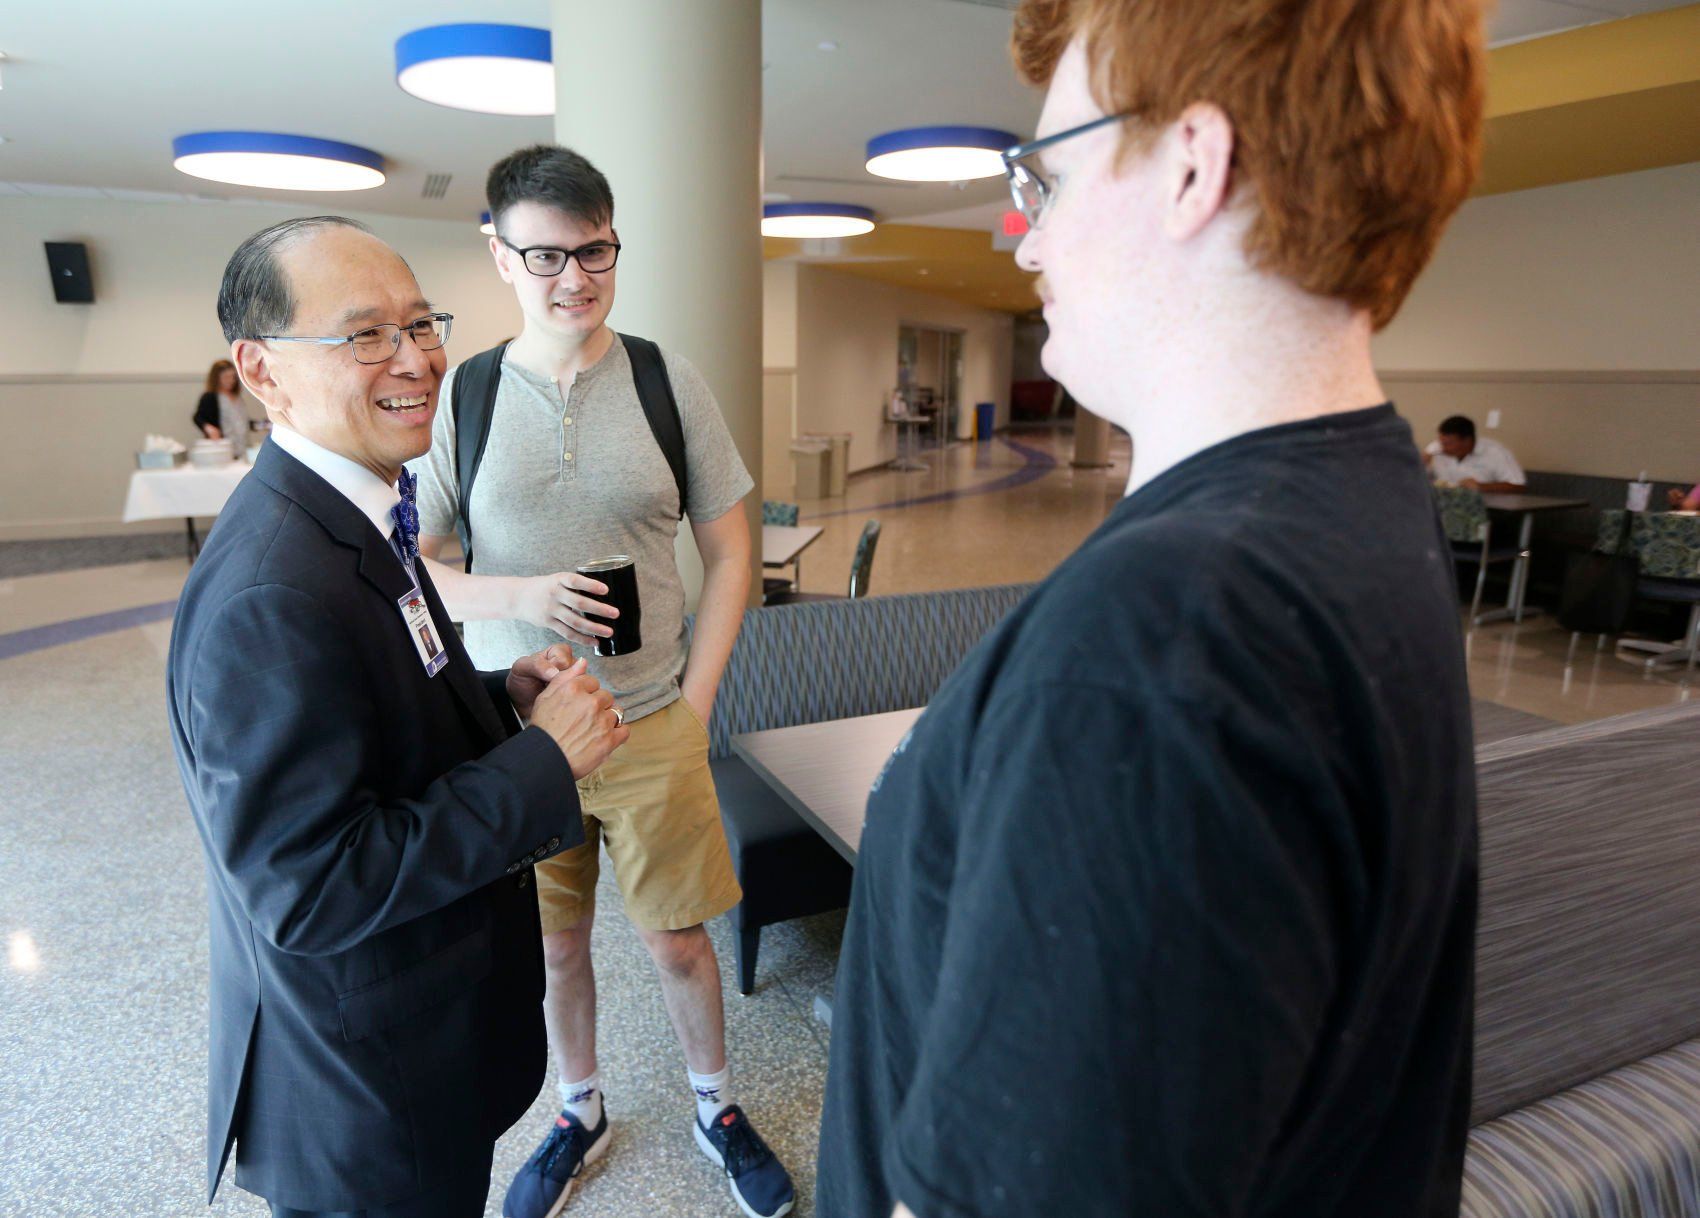 Students Tim Johnson (center) and Robert Craker (right) chat with departing Northeast Iowa Community College President Liang Chee Wee during his goodbye ceremony held at the Peosta campus Wednesday.    PHOTO CREDIT: Dave Kettering